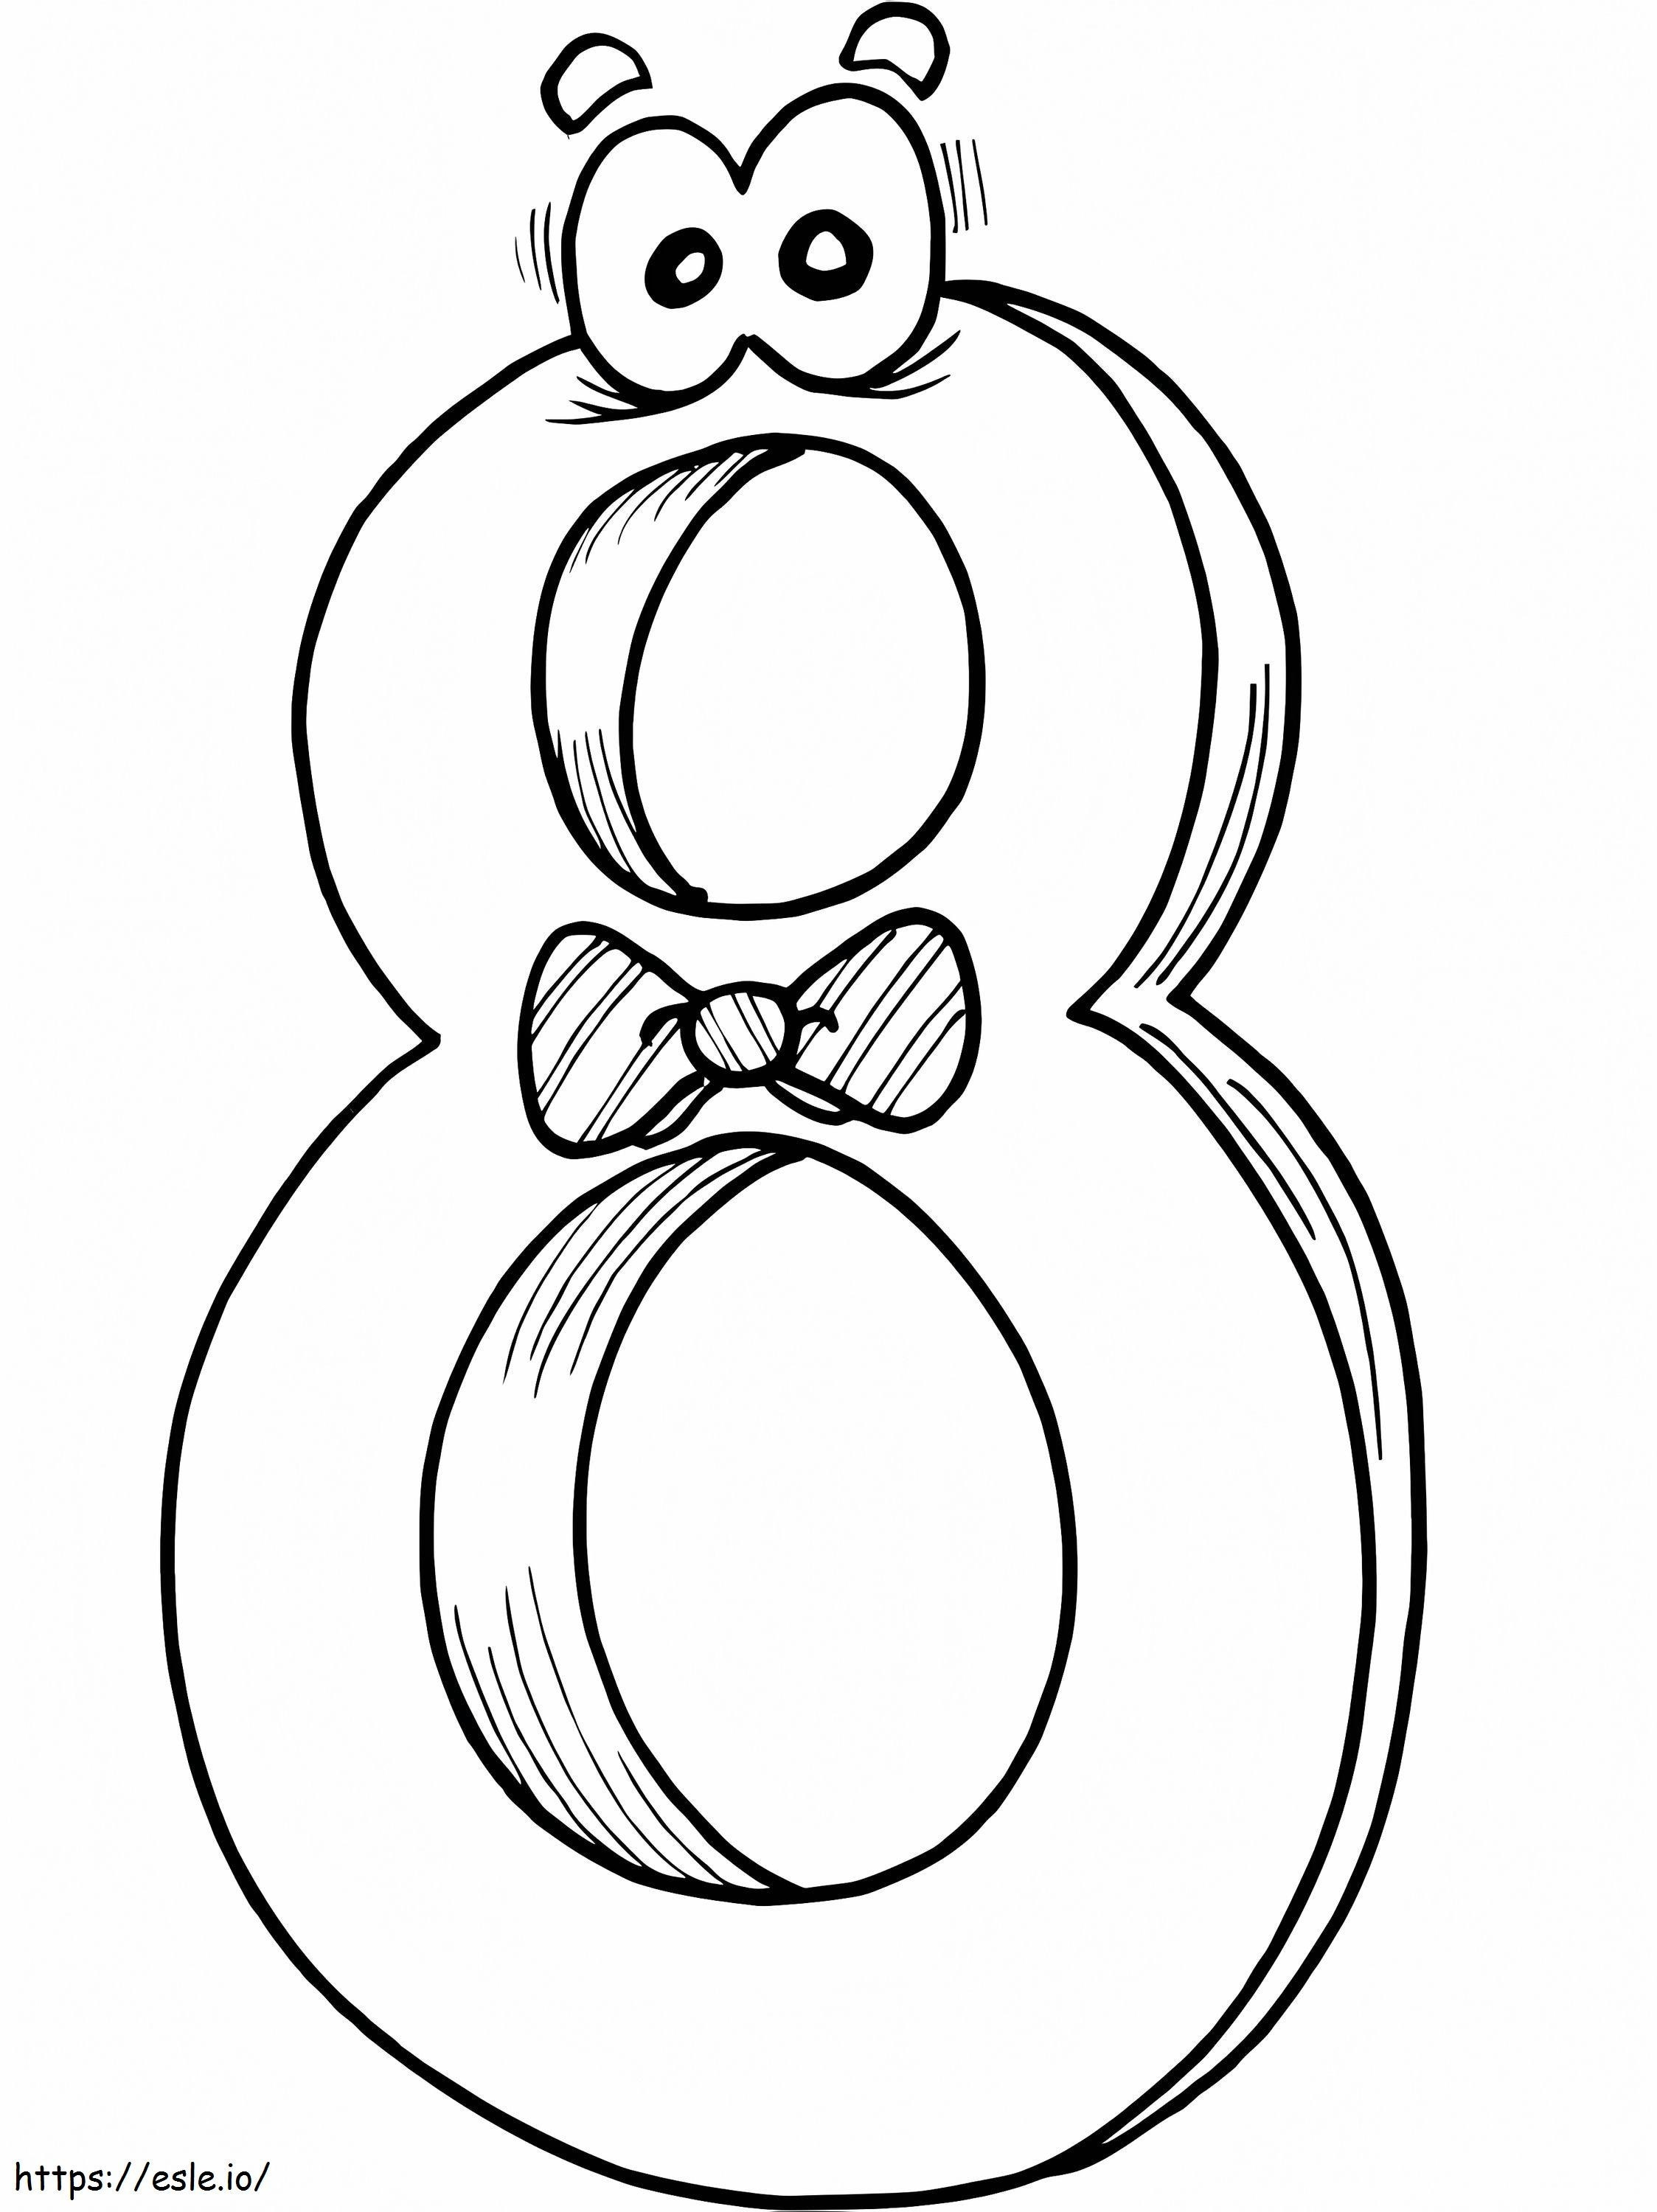 Cute Number 8 coloring page